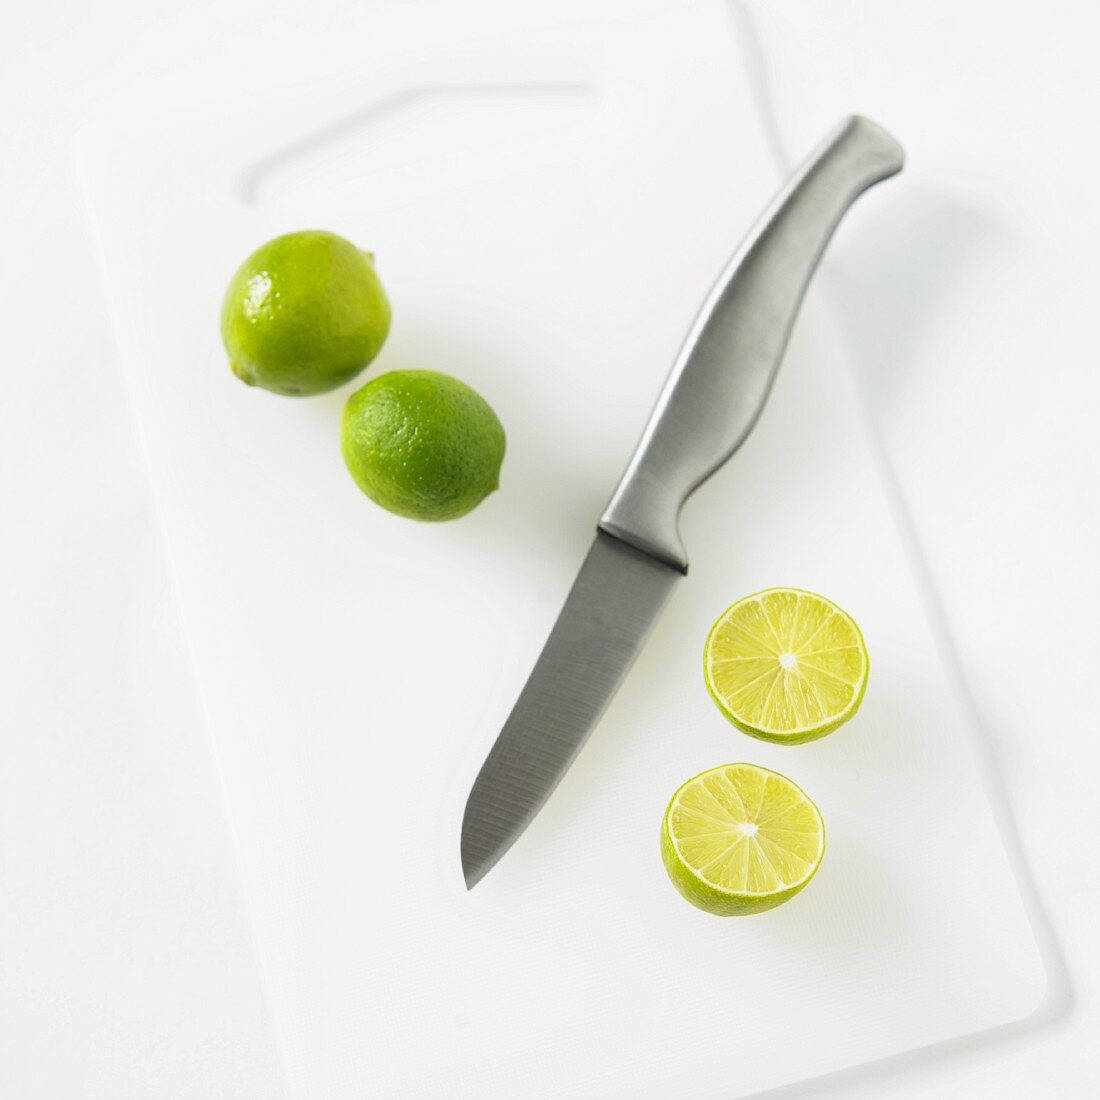 Whole and Halved Key Limes with a Knife on a White Cutting Board